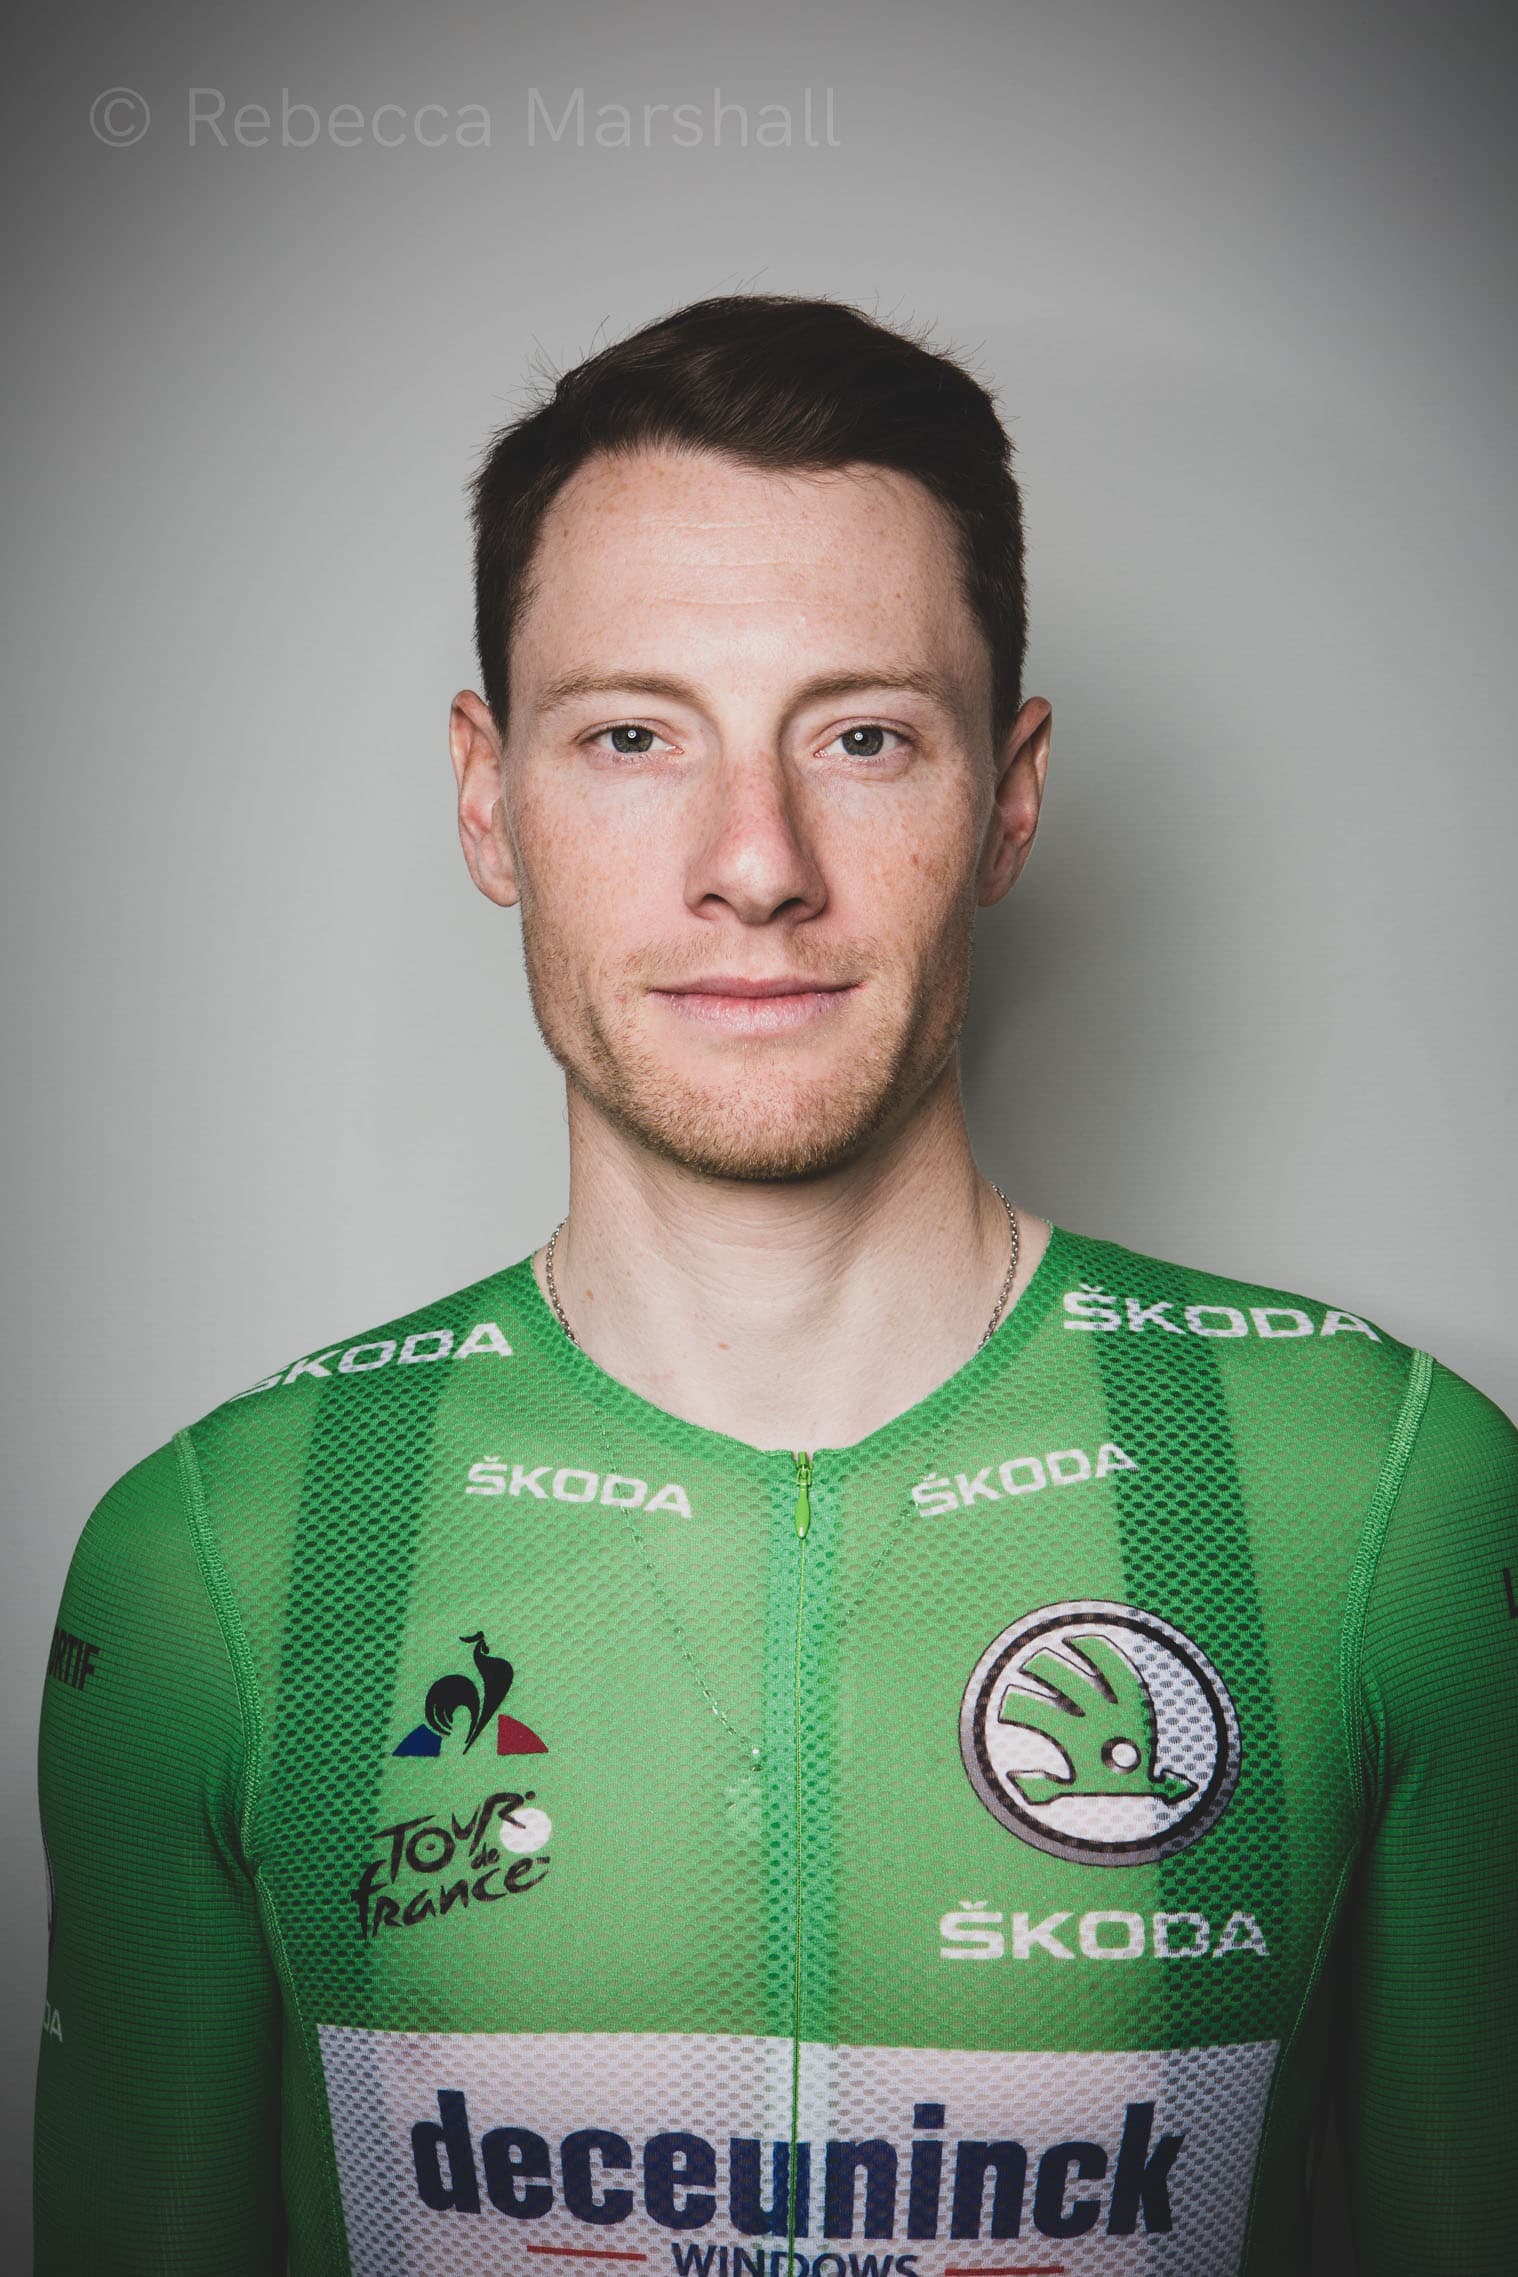 Close-up studio portrait of Sam Bennett, professional road racing cyclist, in a green jersey